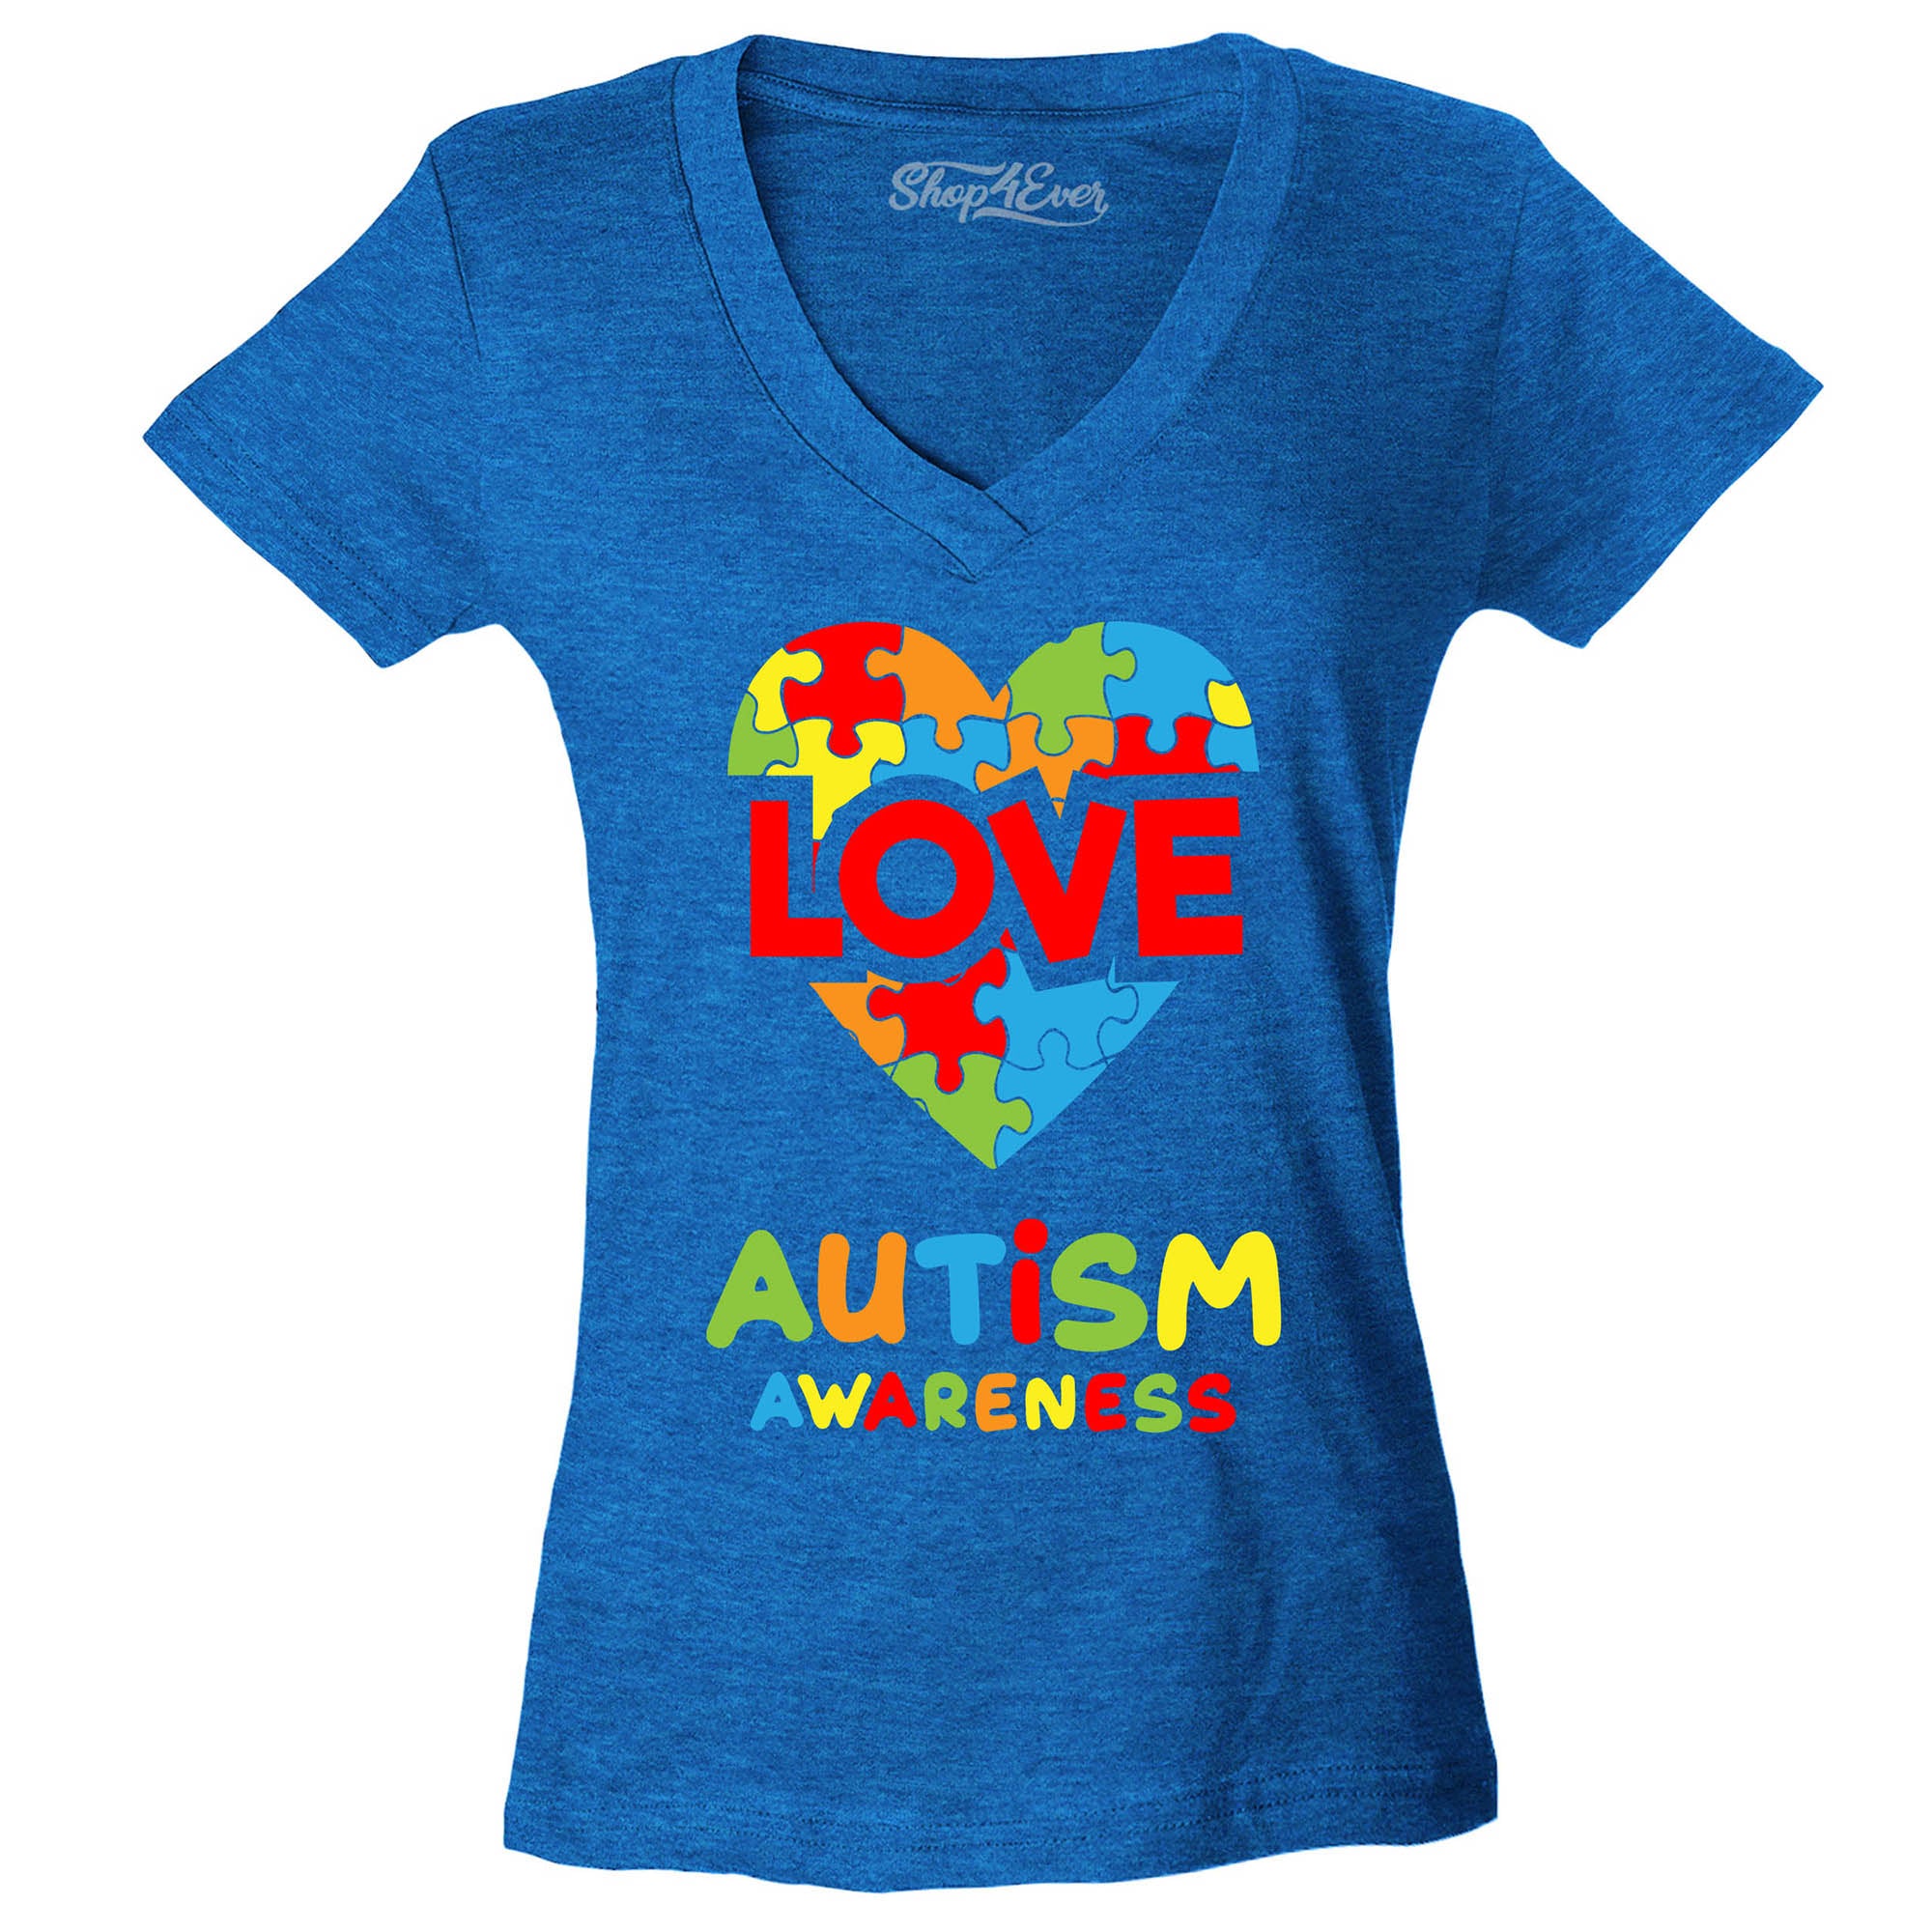 Autism Awareness Love with Puzzled Heart Women's V-Neck T-Shirt Slim Fit